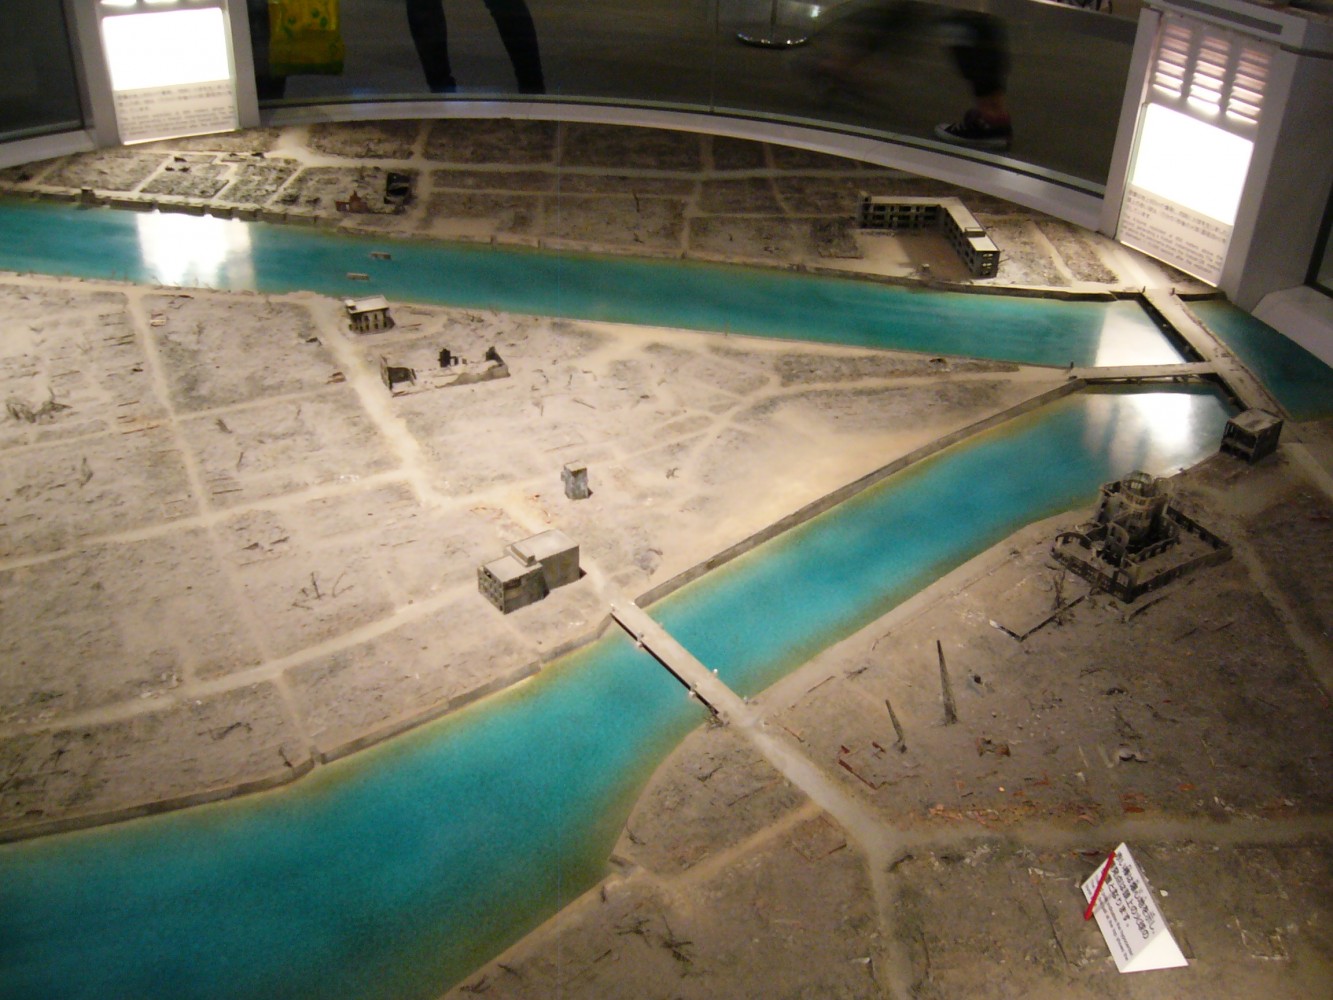 Model of Hiroshima City After 6 August 1945